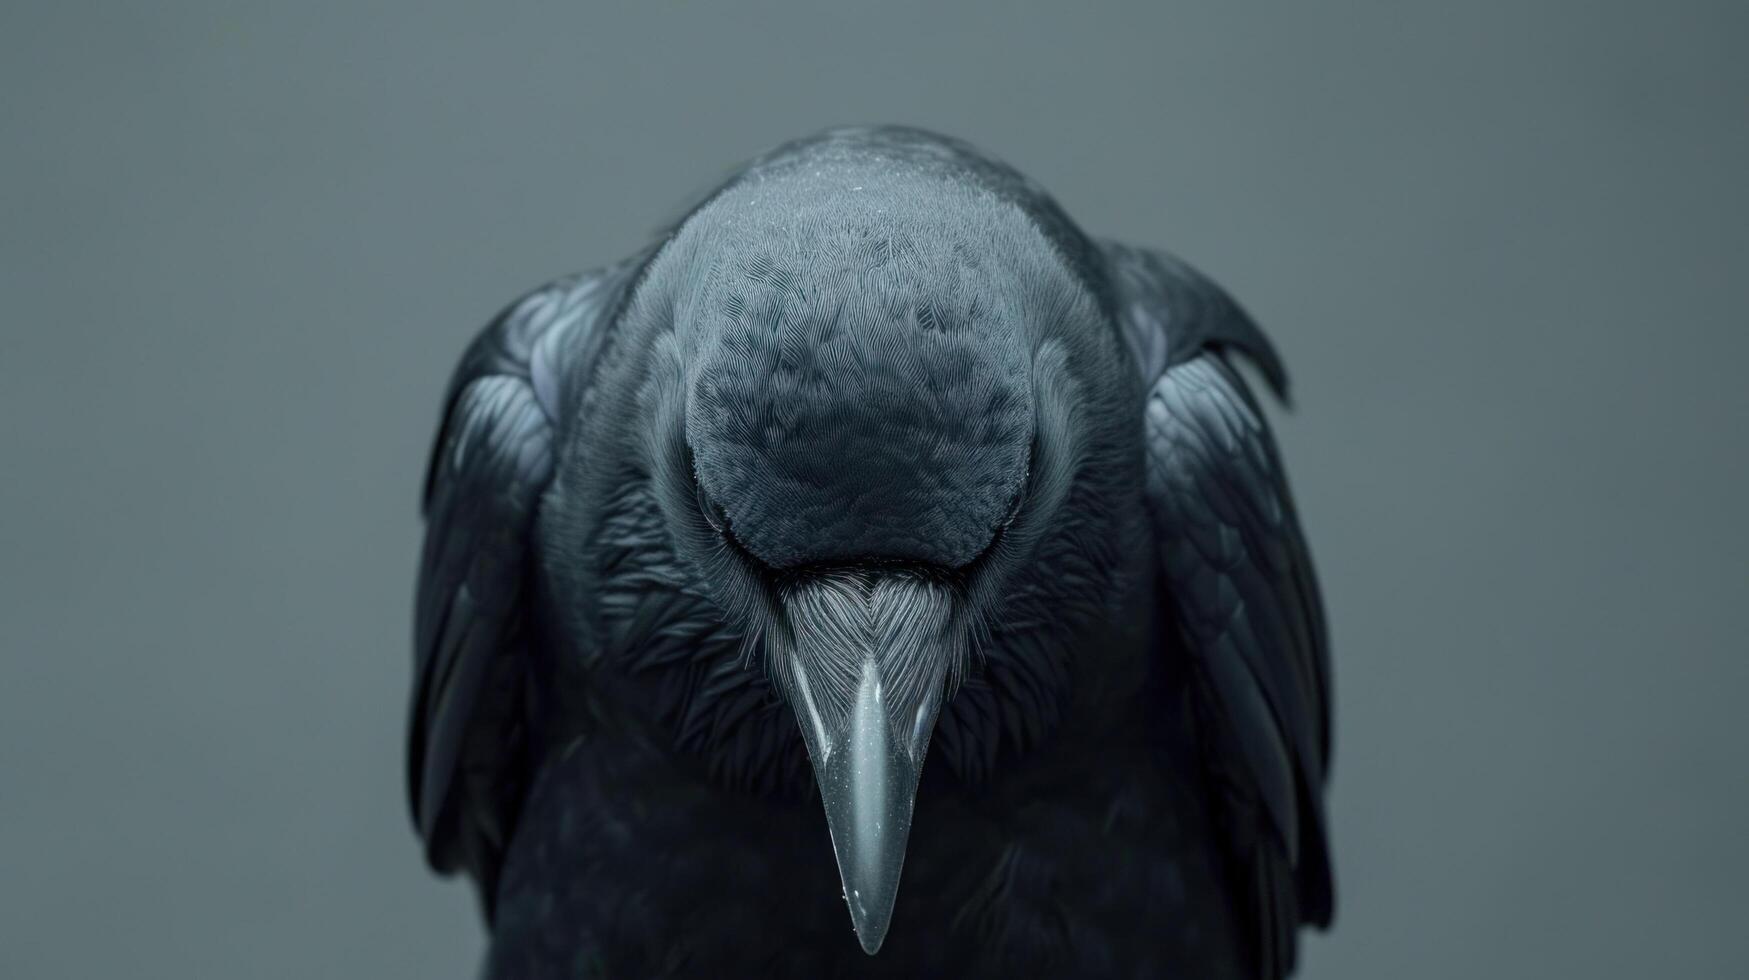 AI generated a crow with its head down, sitting in a gray studio photo